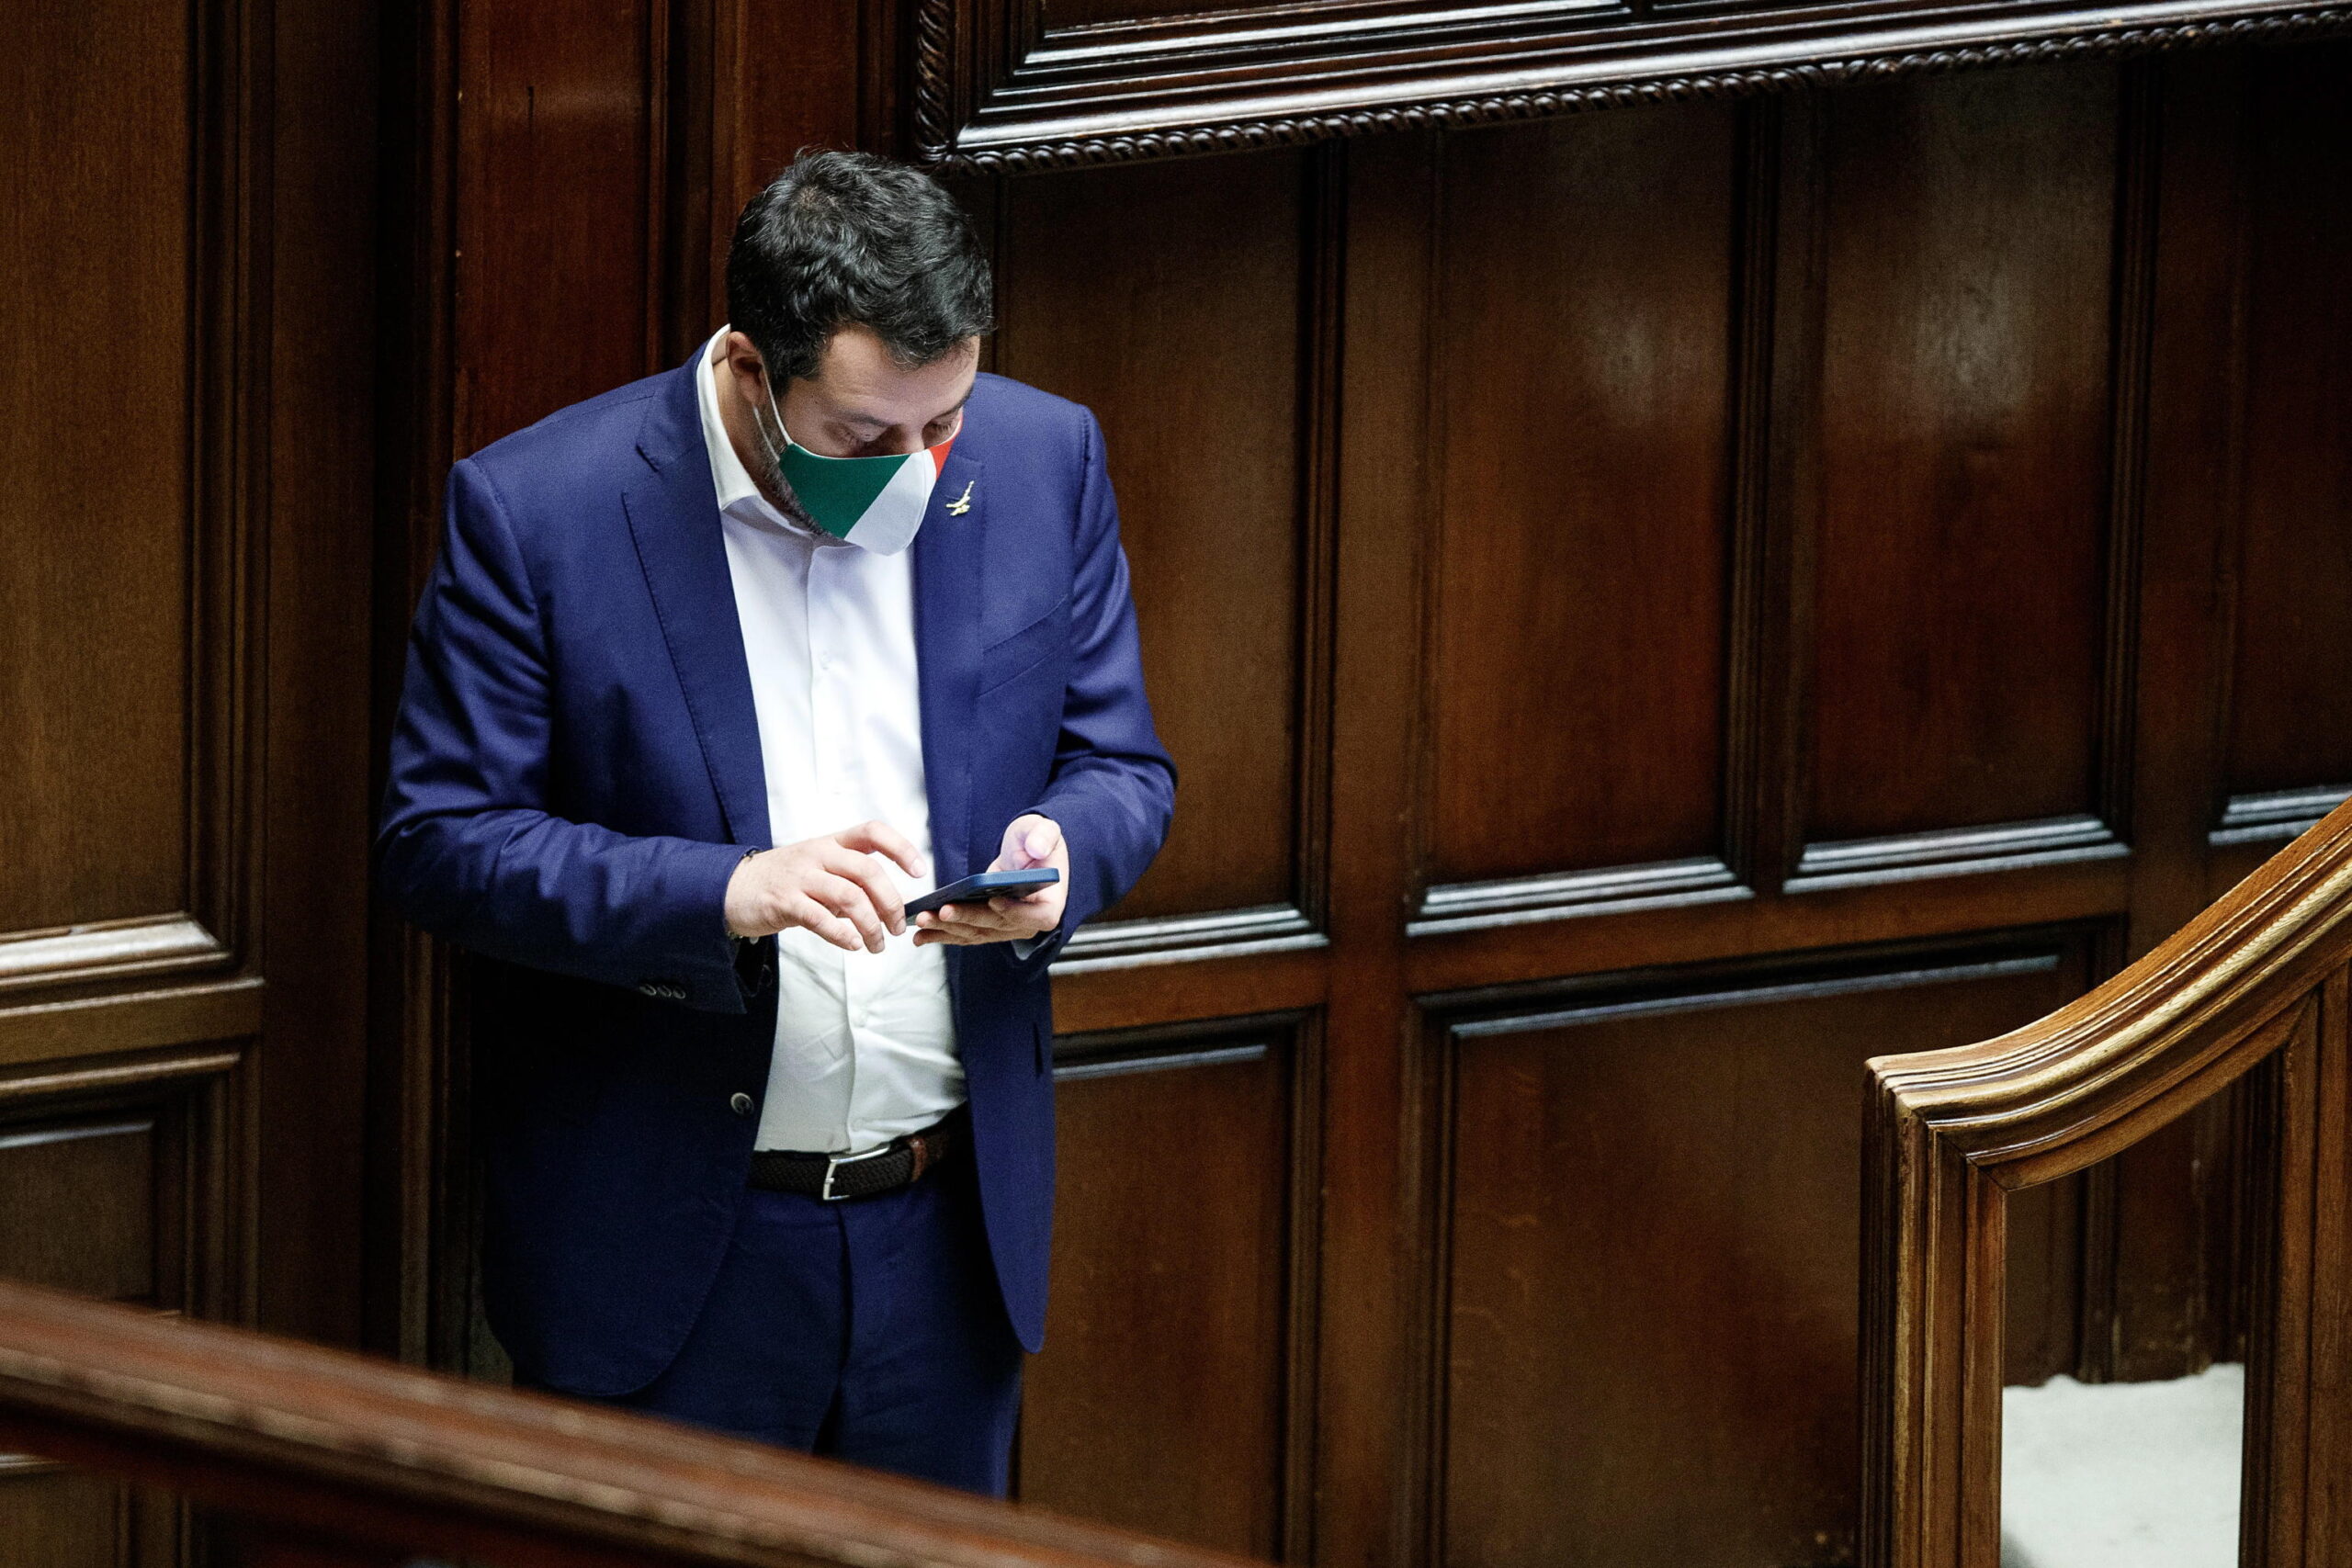 epa09714119 Italy's League party leader Matteo Salvini checks his mobile phone during the fifth ballot of the presidential election at the Lower House (Chamber of Deputies), in Rome, Italy, 28 January 2022. Italian lawmakers from both houses of Parliament and regional representatives on 28 January are taking part in the fifth ballot of the presidential election, after the first four rounds of voting proved inconclusive.  EPA/ROBERTO MONALDO / POOL